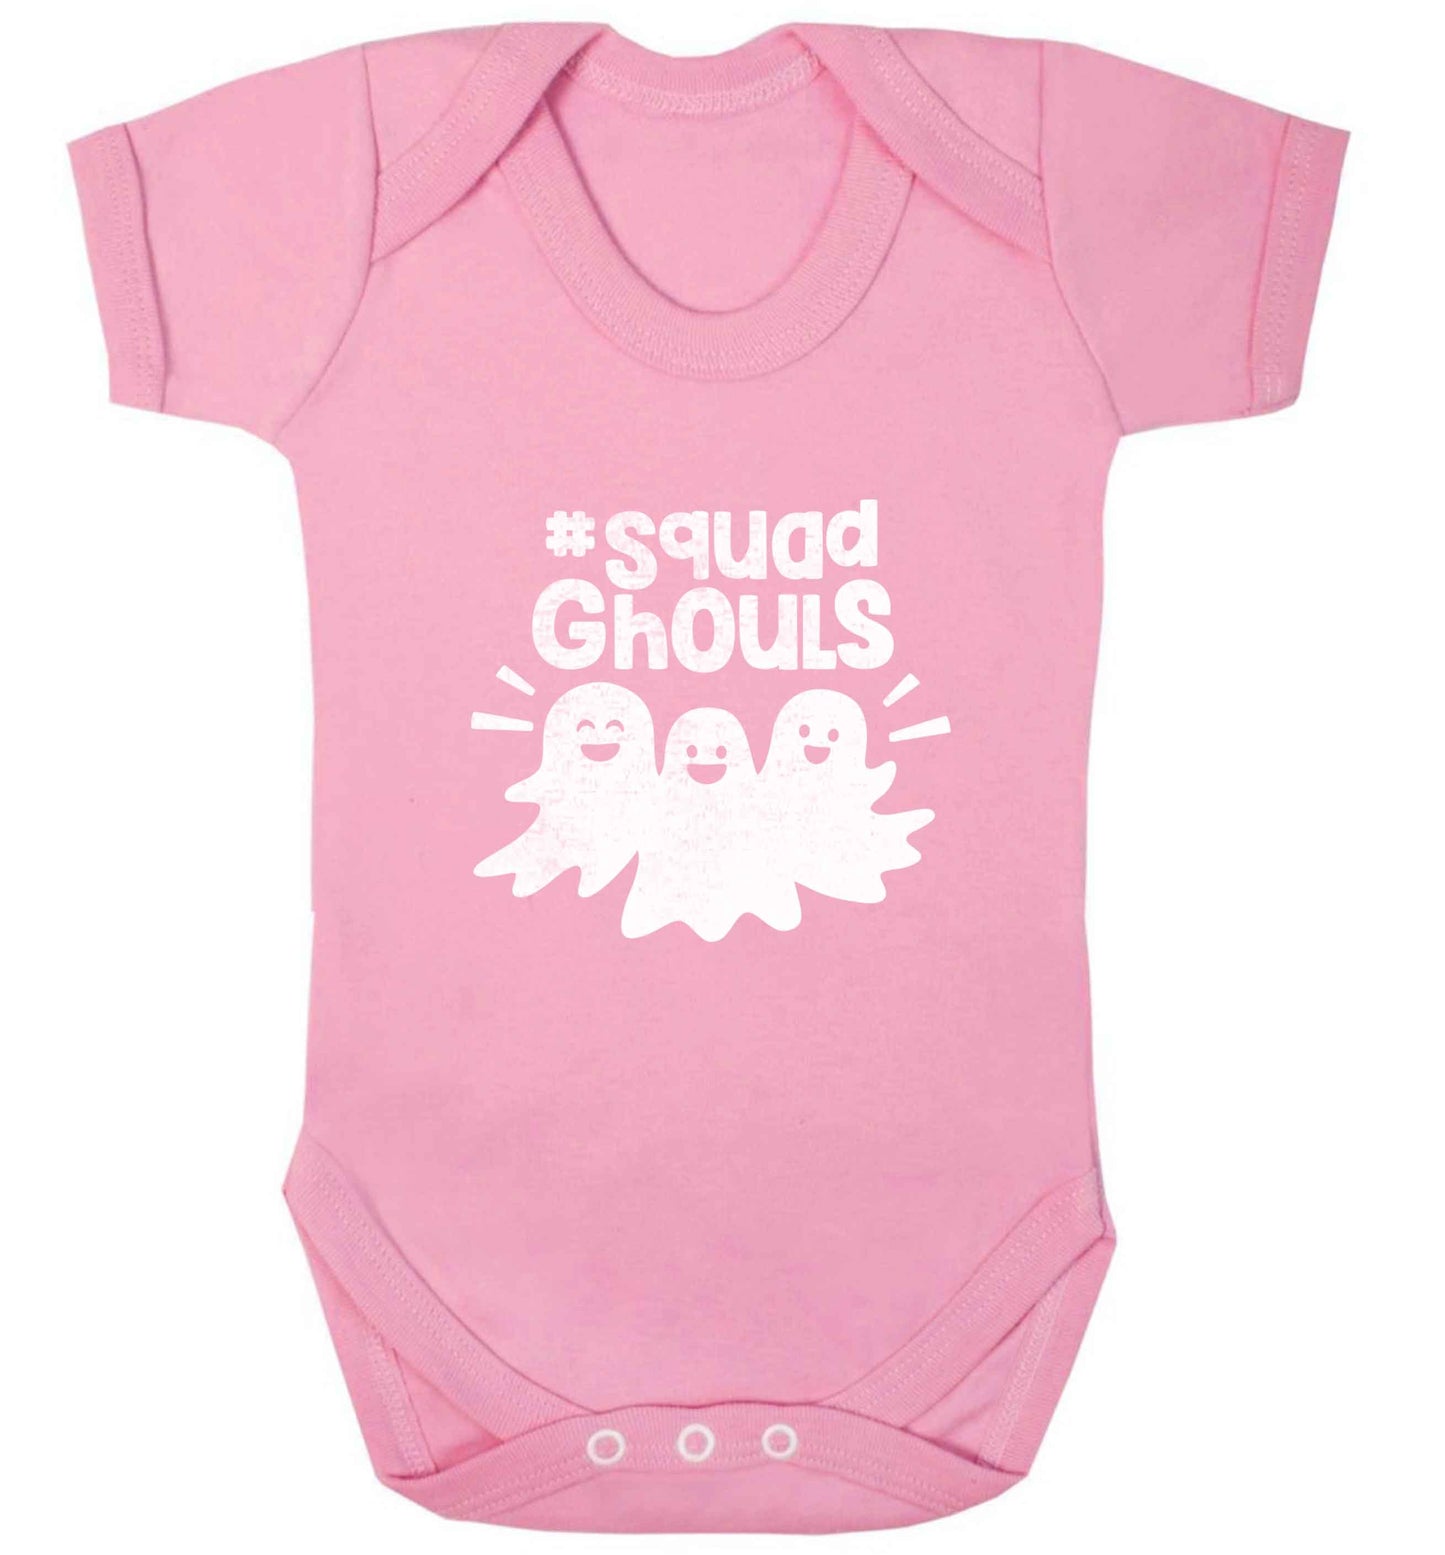 Squad ghouls Kit baby vest pale pink 18-24 months